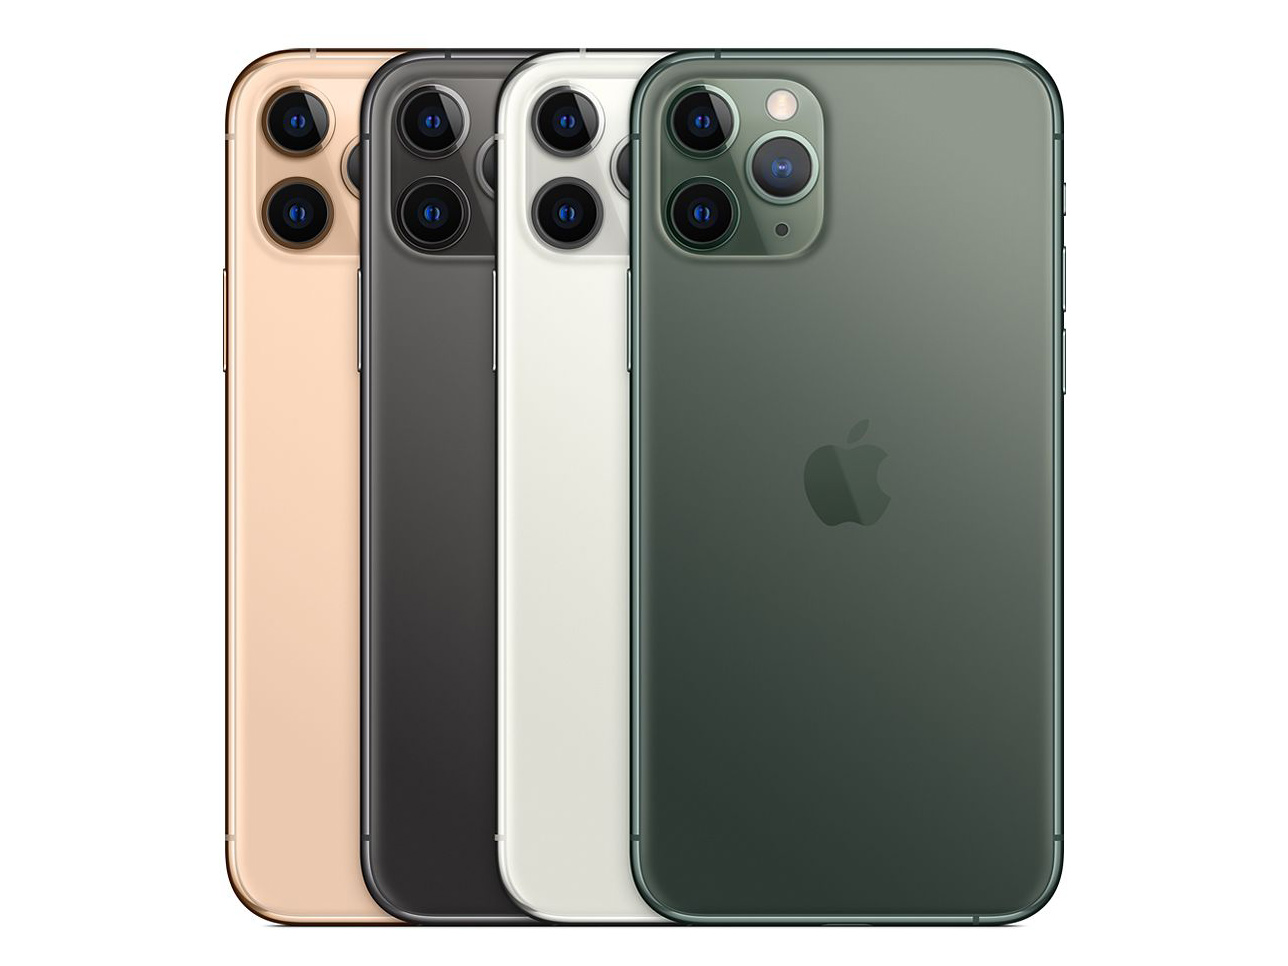 iPhone 11 Pro / Max Review Photo Tips for Beginners